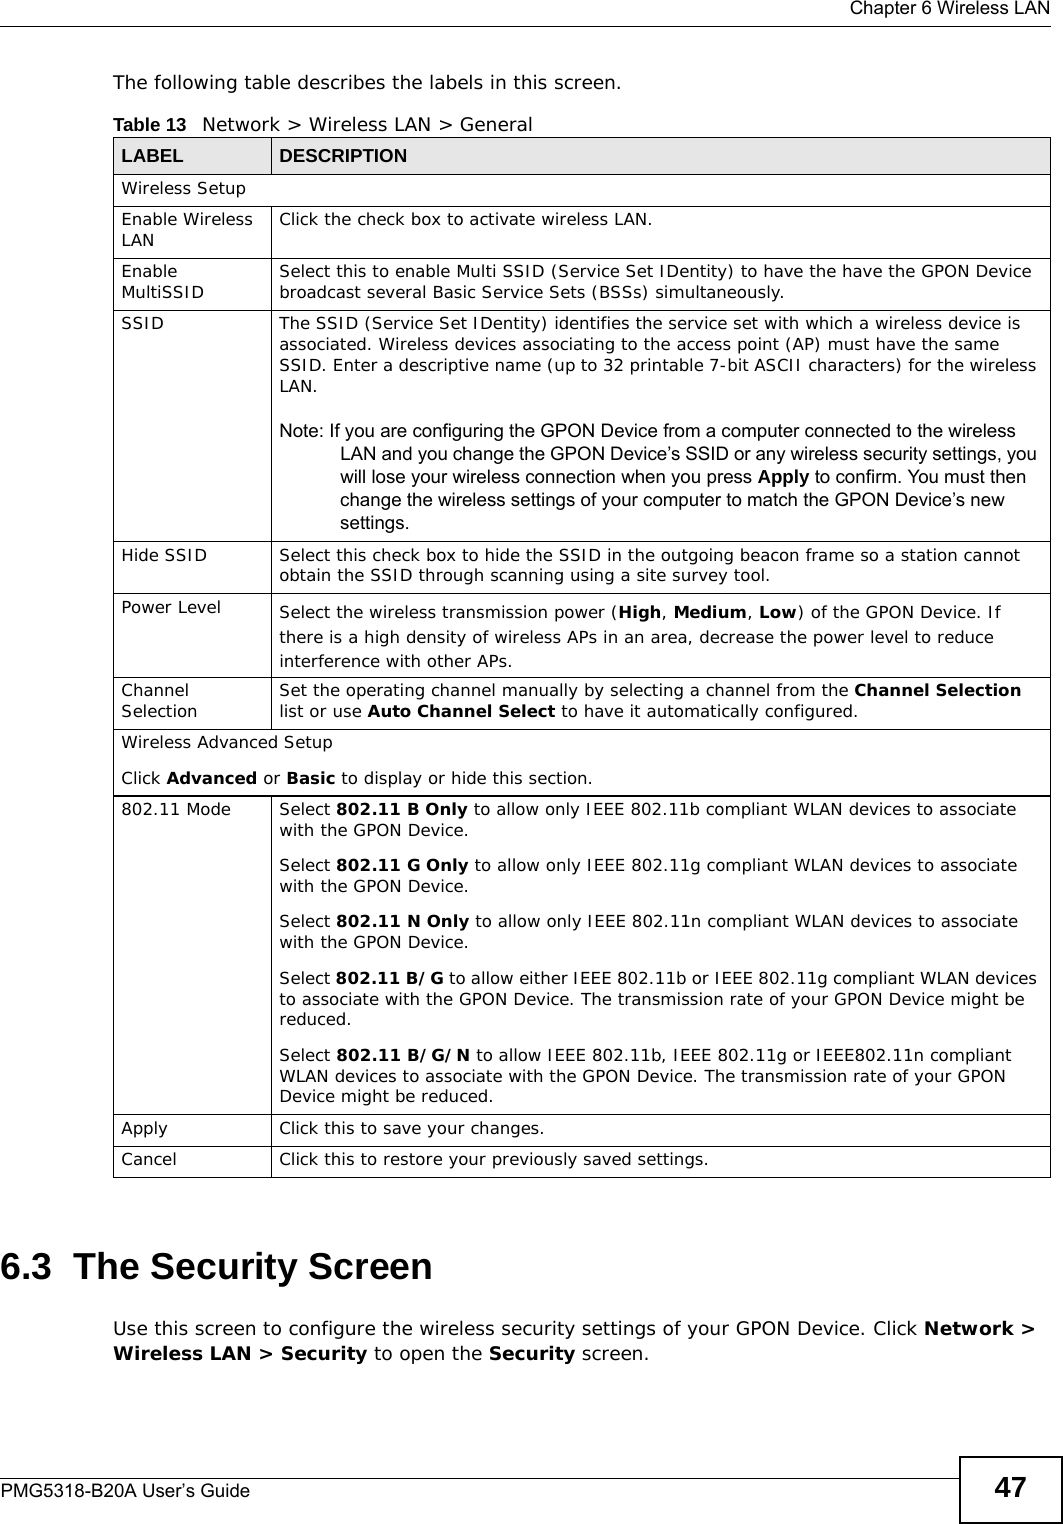  Chapter 6 Wireless LANPMG5318-B20A User’s Guide 47The following table describes the labels in this screen. 6.3  The Security ScreenUse this screen to configure the wireless security settings of your GPON Device. Click Network &gt; Wireless LAN &gt; Security to open the Security screen.Table 13   Network &gt; Wireless LAN &gt; GeneralLABEL DESCRIPTIONWireless SetupEnable Wireless LAN Click the check box to activate wireless LAN.Enable MultiSSID Select this to enable Multi SSID (Service Set IDentity) to have the have the GPON Device broadcast several Basic Service Sets (BSSs) simultaneously.SSID The SSID (Service Set IDentity) identifies the service set with which a wireless device is associated. Wireless devices associating to the access point (AP) must have the same SSID. Enter a descriptive name (up to 32 printable 7-bit ASCII characters) for the wireless LAN. Note: If you are configuring the GPON Device from a computer connected to the wireless LAN and you change the GPON Device’s SSID or any wireless security settings, you will lose your wireless connection when you press Apply to confirm. You must then change the wireless settings of your computer to match the GPON Device’s new settings.Hide SSID Select this check box to hide the SSID in the outgoing beacon frame so a station cannot obtain the SSID through scanning using a site survey tool.Power Level Select the wireless transmission power (High, Medium, Low) of the GPON Device. If there is a high density of wireless APs in an area, decrease the power level to reduce interference with other APs.Channel Selection Set the operating channel manually by selecting a channel from the Channel Selection list or use Auto Channel Select to have it automatically configured.Wireless Advanced SetupClick Advanced or Basic to display or hide this section.802.11 Mode Select 802.11 B Only to allow only IEEE 802.11b compliant WLAN devices to associate with the GPON Device.Select 802.11 G Only to allow only IEEE 802.11g compliant WLAN devices to associate with the GPON Device.Select 802.11 N Only to allow only IEEE 802.11n compliant WLAN devices to associate with the GPON Device.Select 802.11 B/G to allow either IEEE 802.11b or IEEE 802.11g compliant WLAN devices to associate with the GPON Device. The transmission rate of your GPON Device might be reduced.Select 802.11 B/G/N to allow IEEE 802.11b, IEEE 802.11g or IEEE802.11n compliant WLAN devices to associate with the GPON Device. The transmission rate of your GPON Device might be reduced.Apply Click this to save your changes.Cancel Click this to restore your previously saved settings.